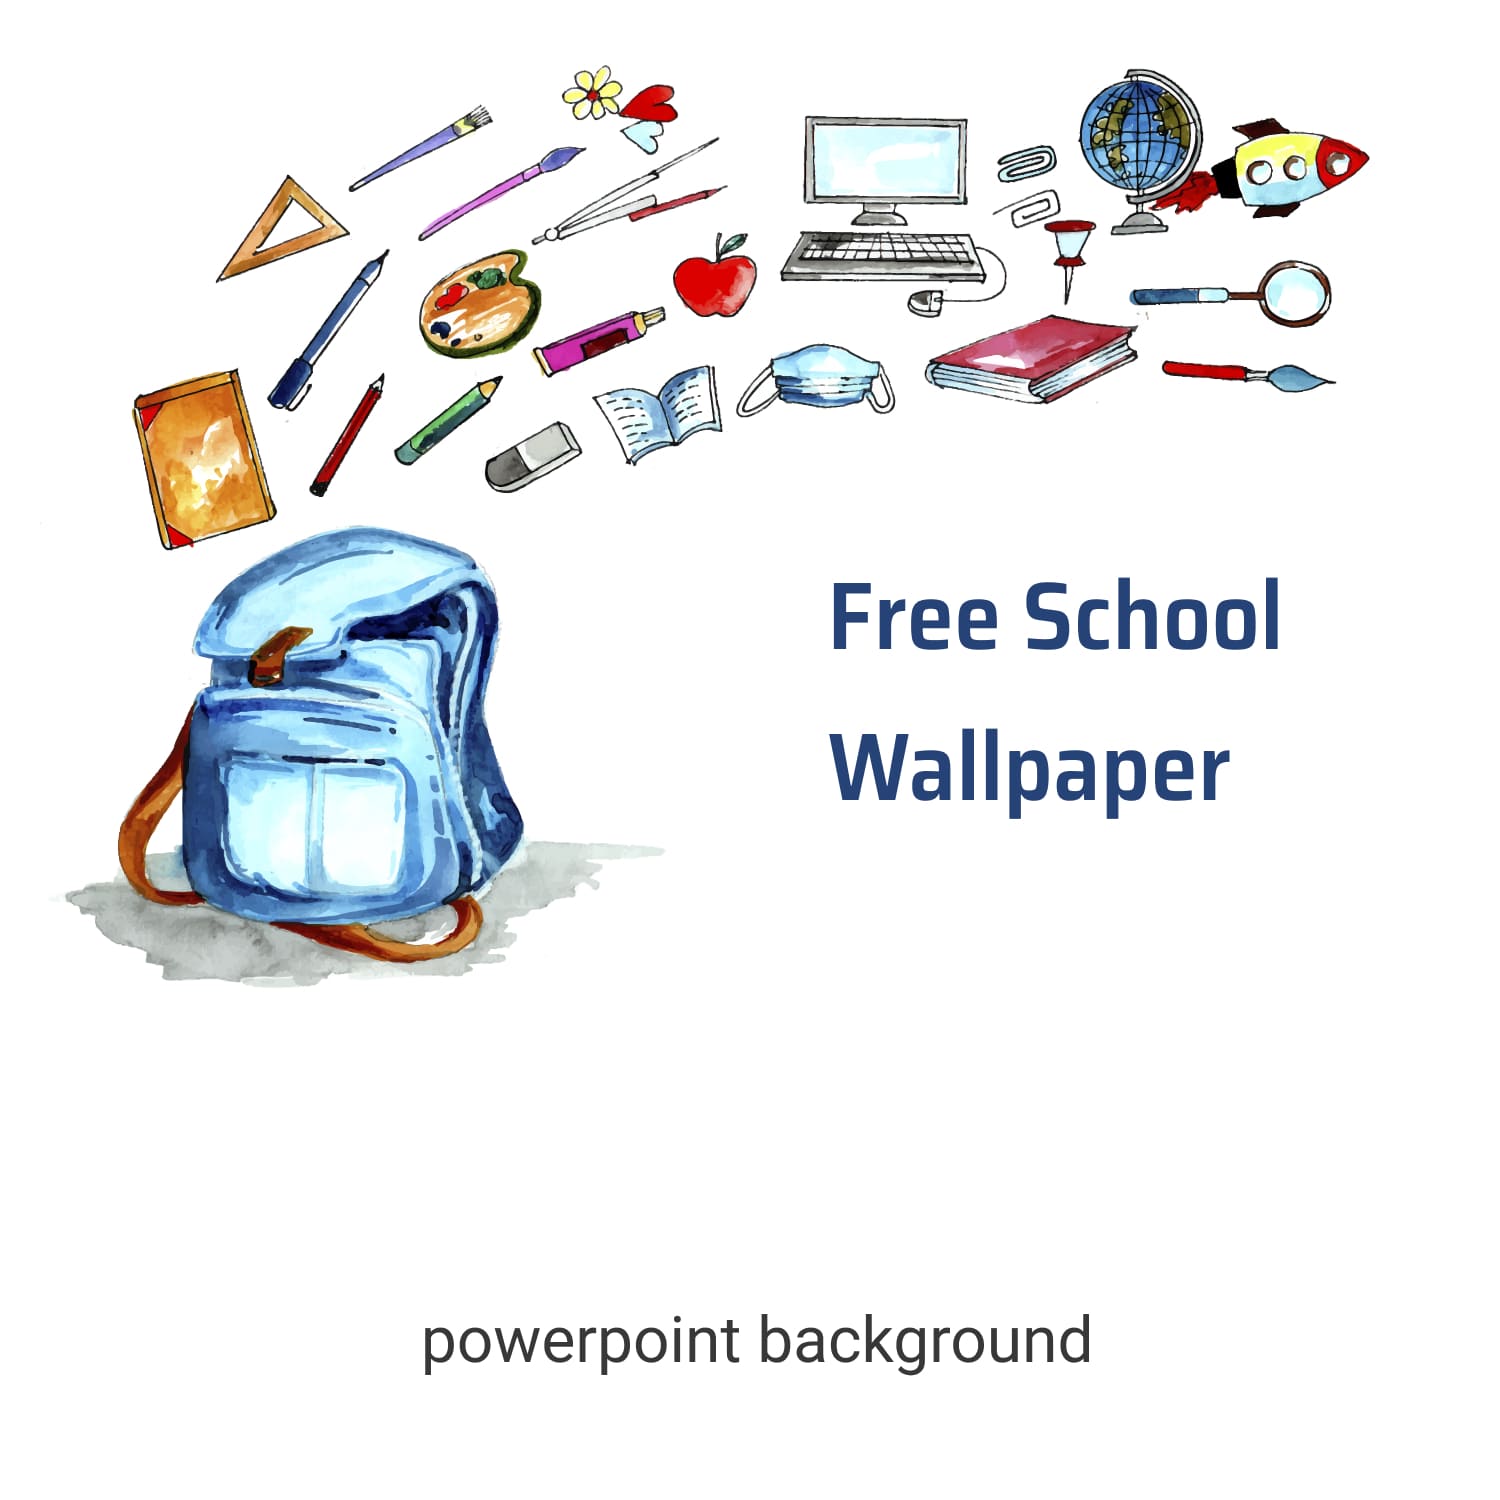 Preview Free School Wallpaper Powerpoint Background 1500x1500 1.